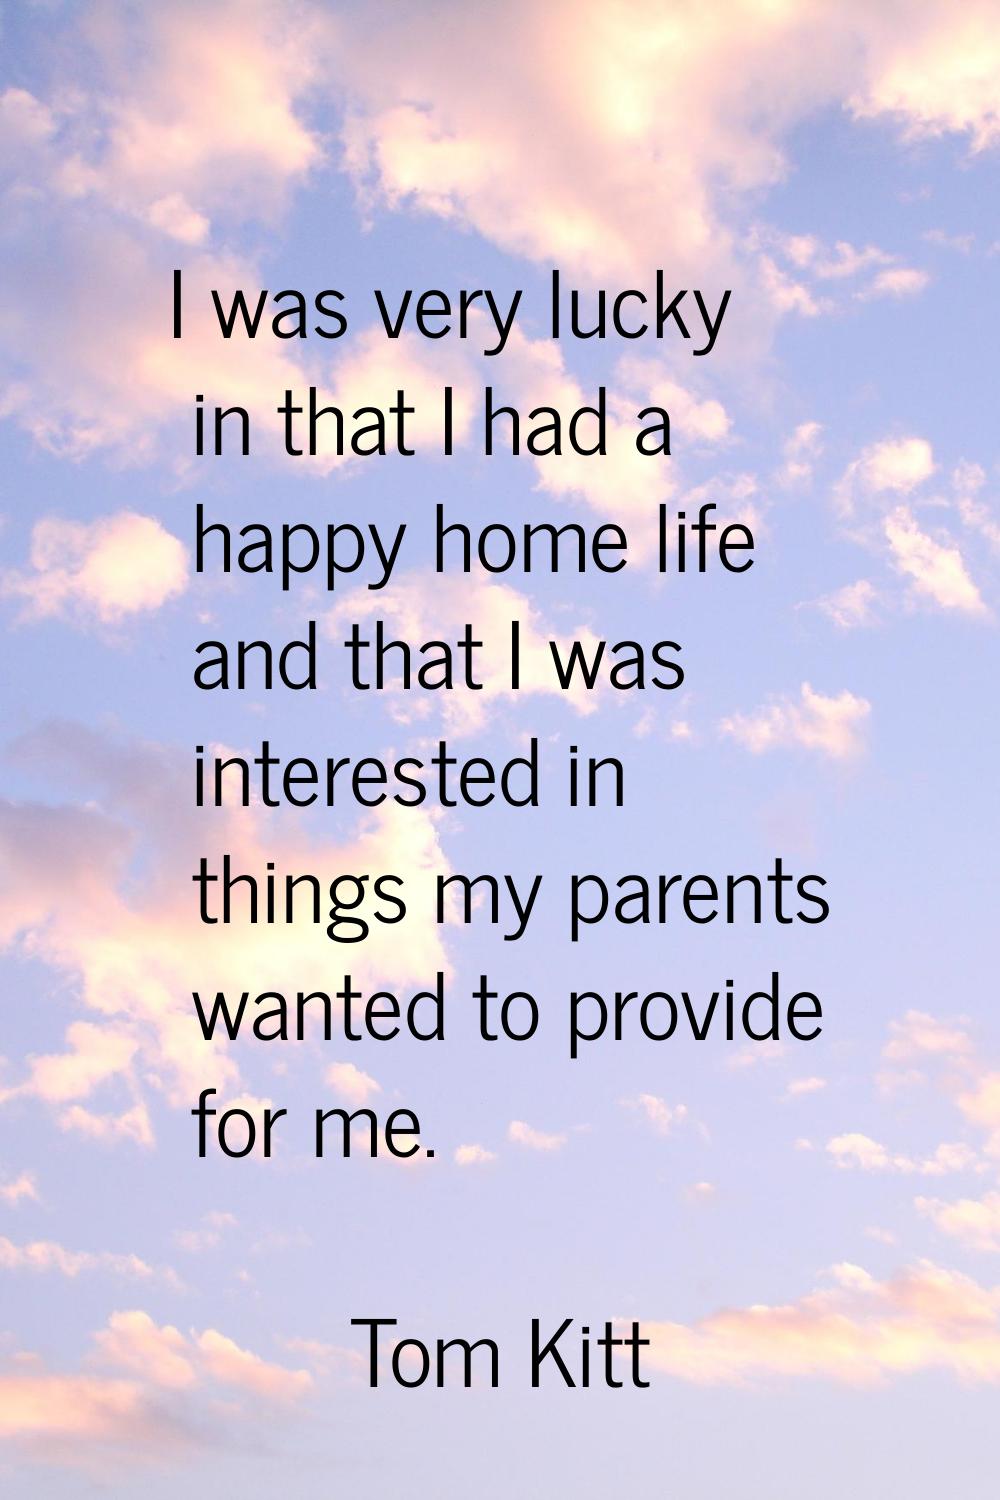 I was very lucky in that I had a happy home life and that I was interested in things my parents wan